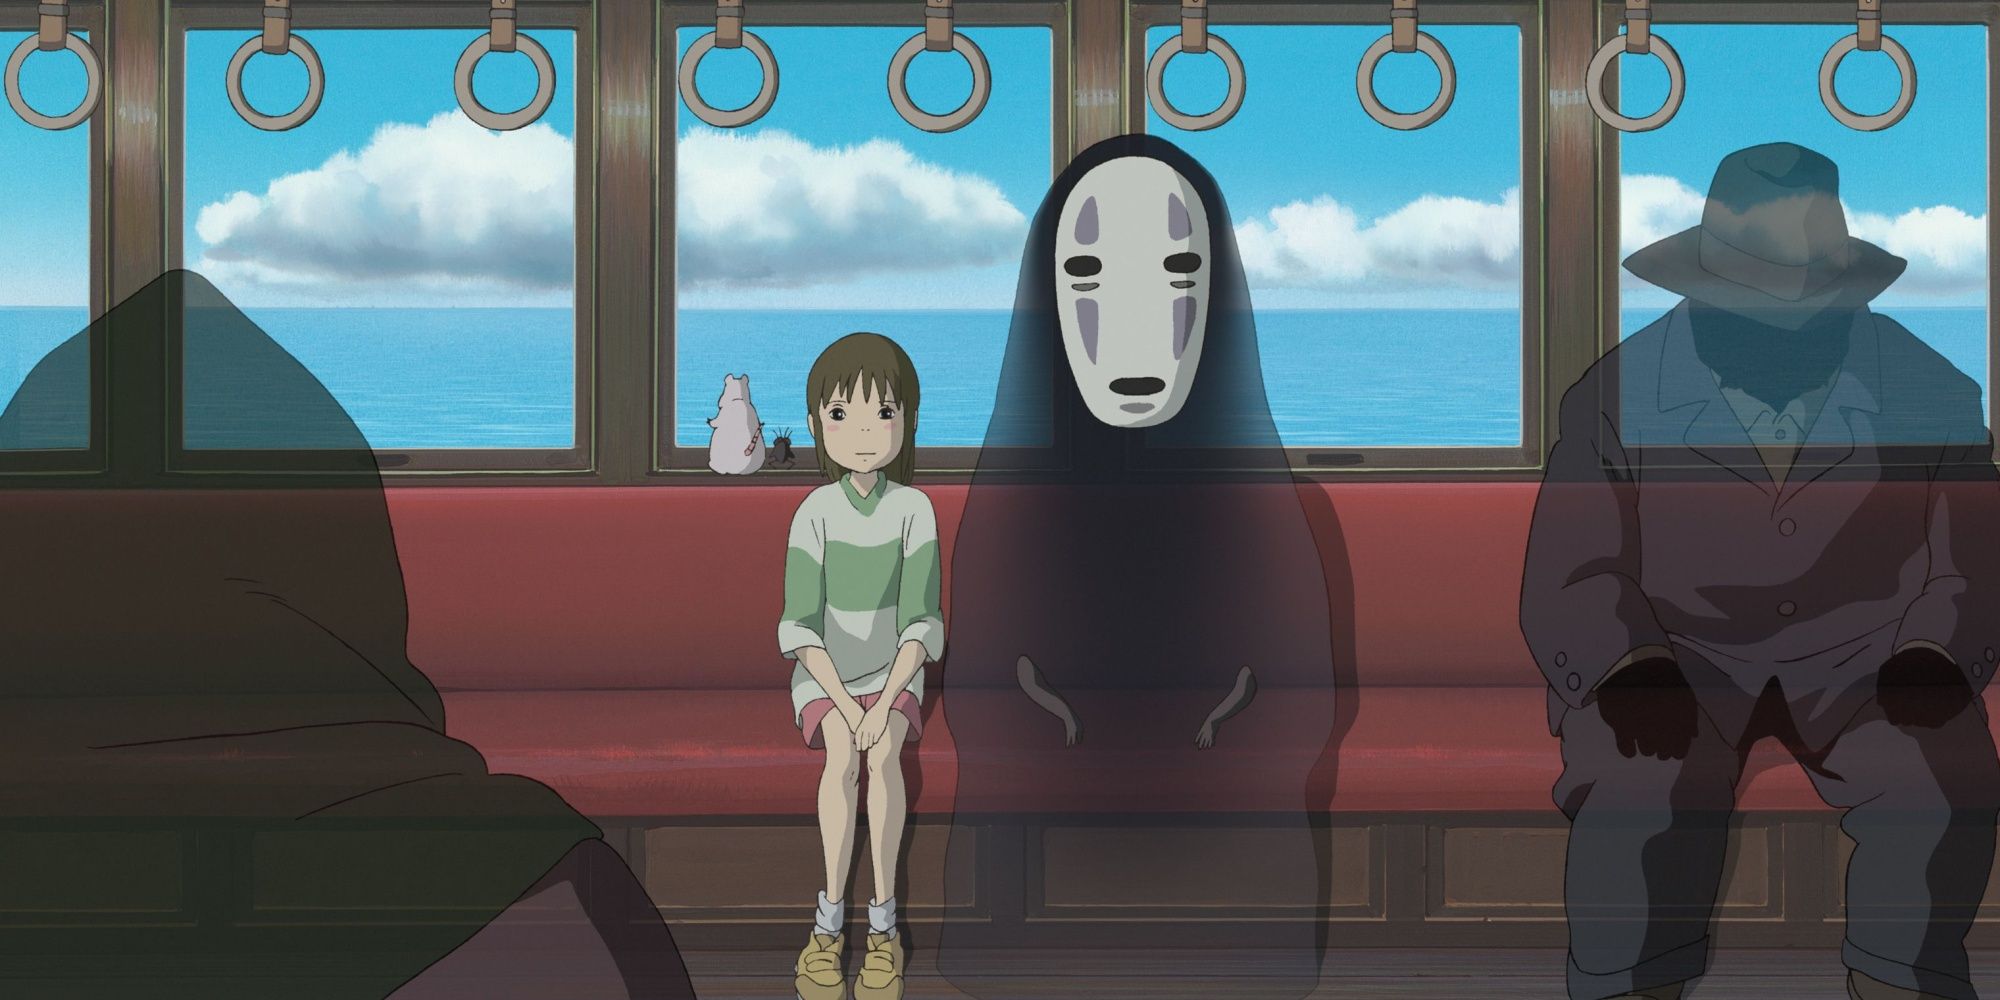 Chihiro and No-Face on the train in Spirited Away